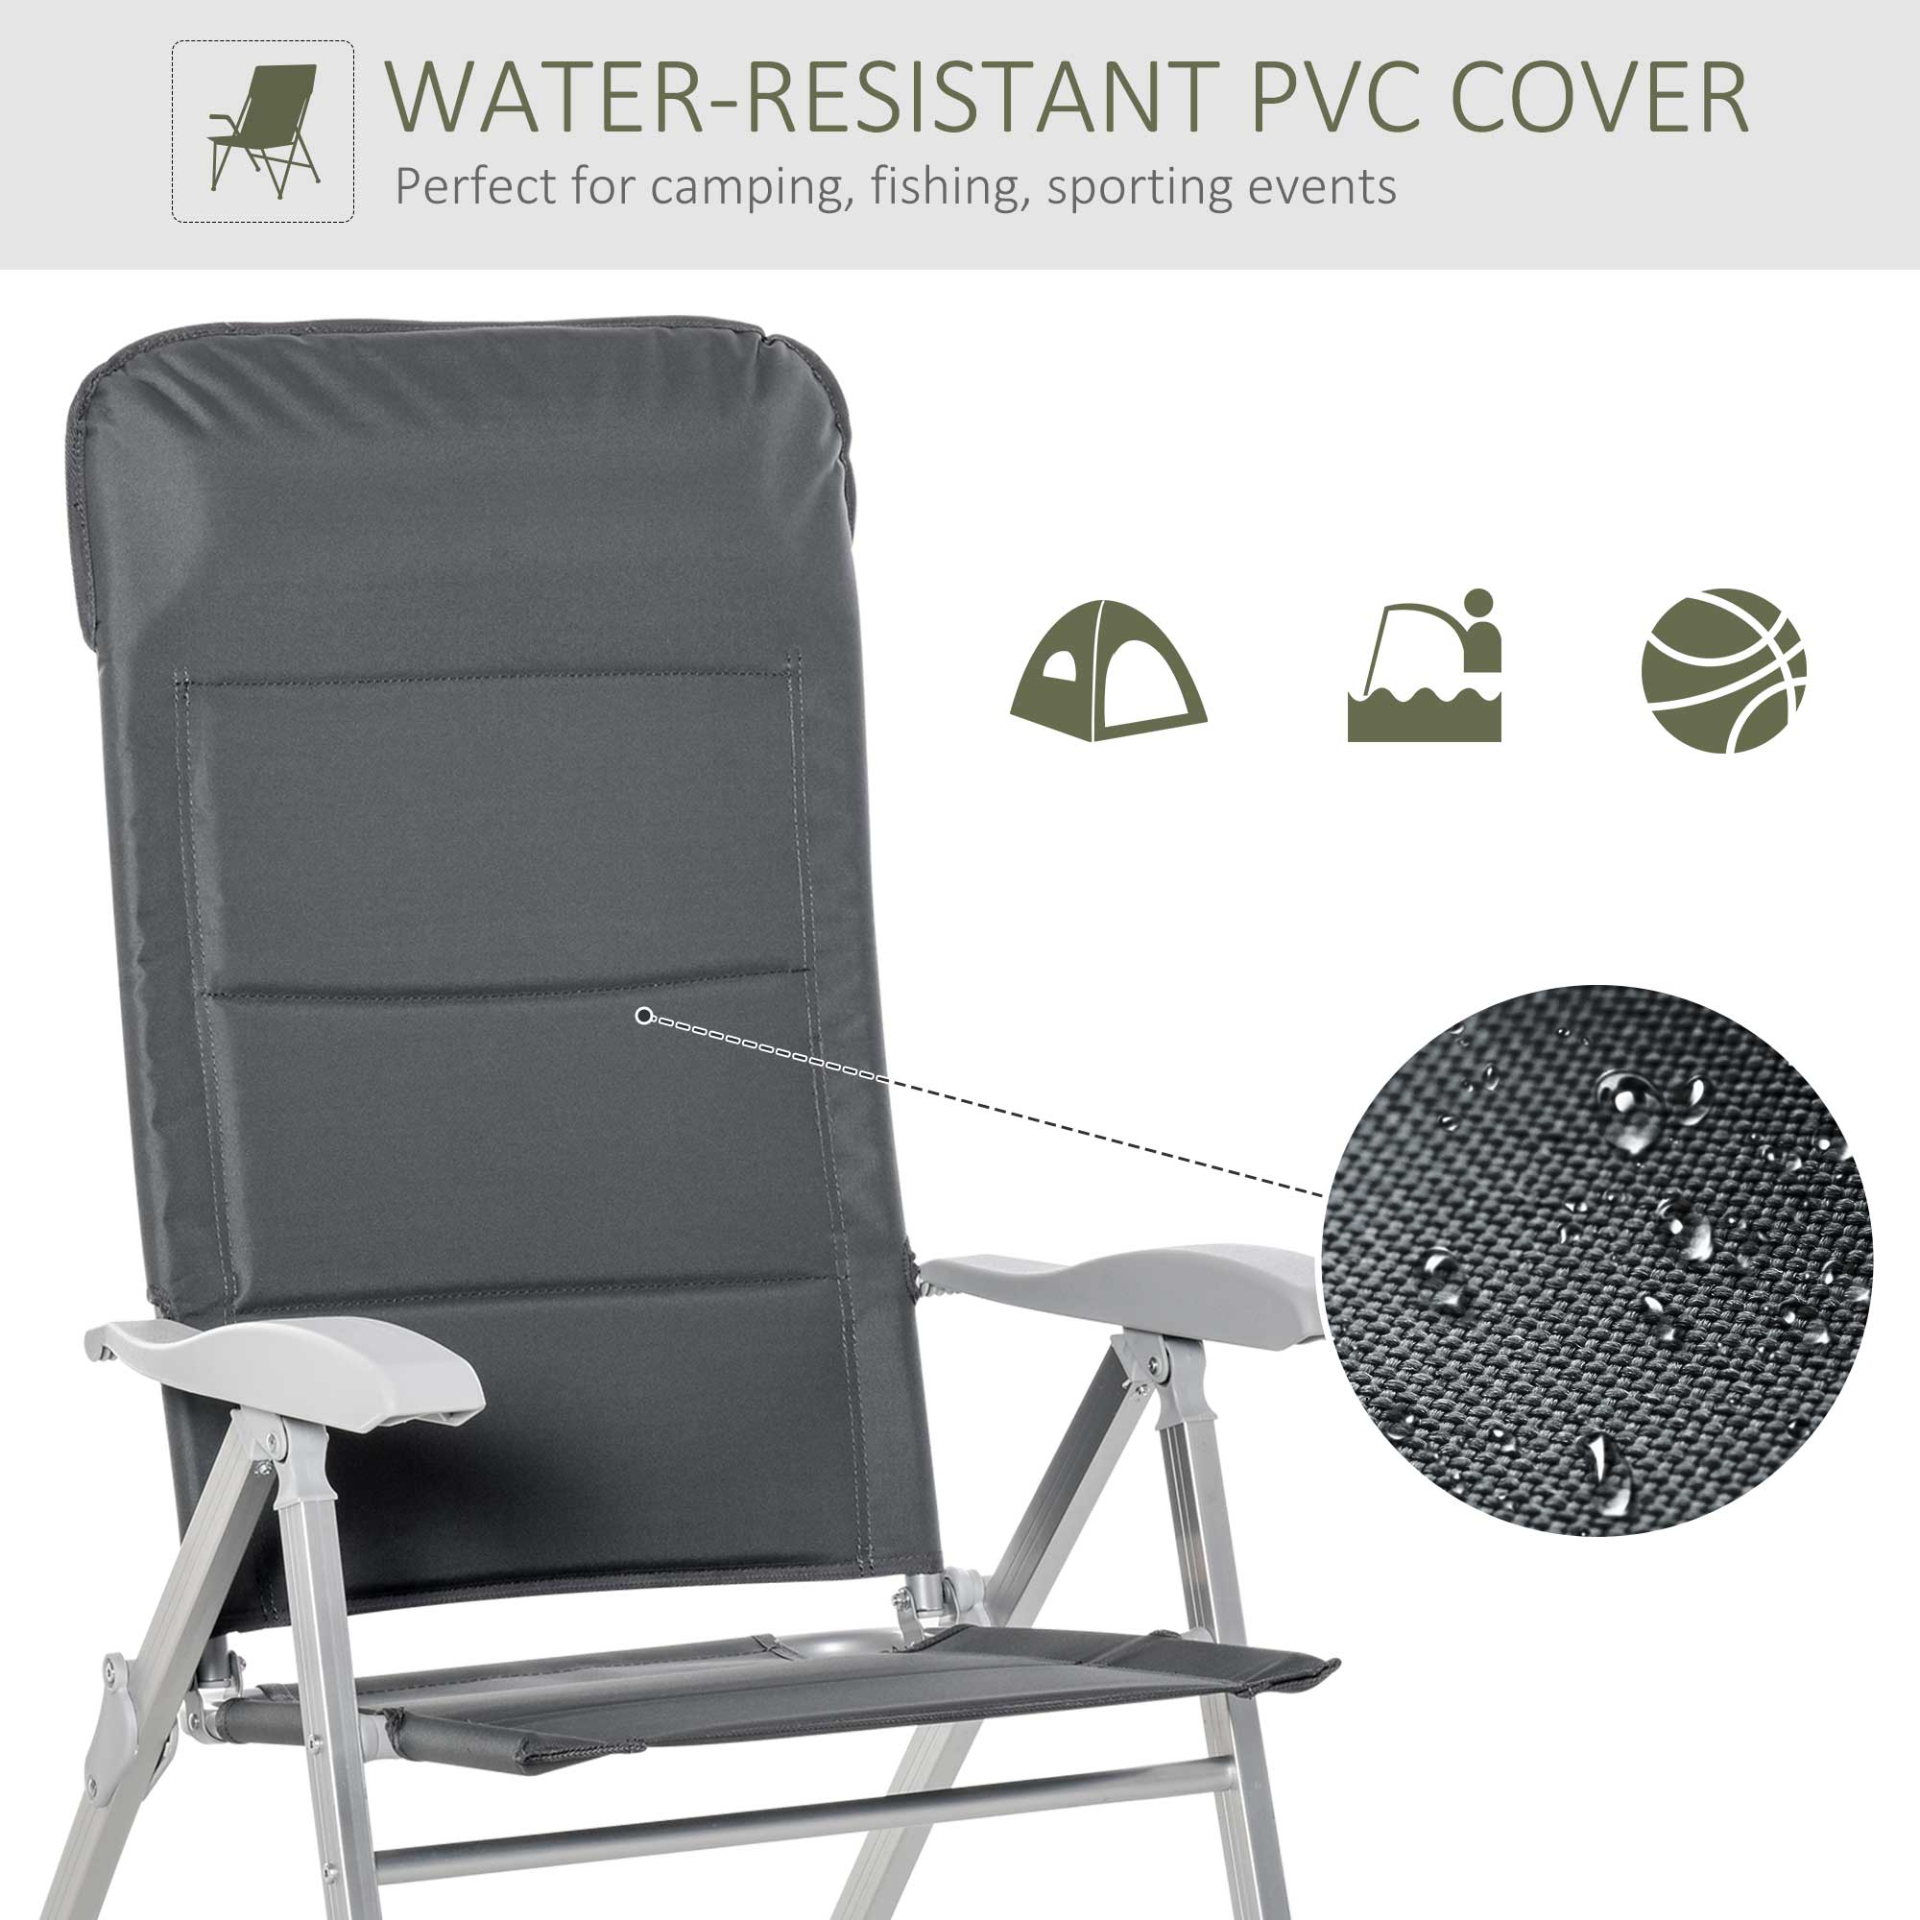 Outsunny Set Of 2 Padded Folding Deck Chair Garden Seats - Adjustable Back, Armrest, Aluminium Frame - Portable Camping Outdoor Pool Grey Camping Chair Cosy Camping Co.   